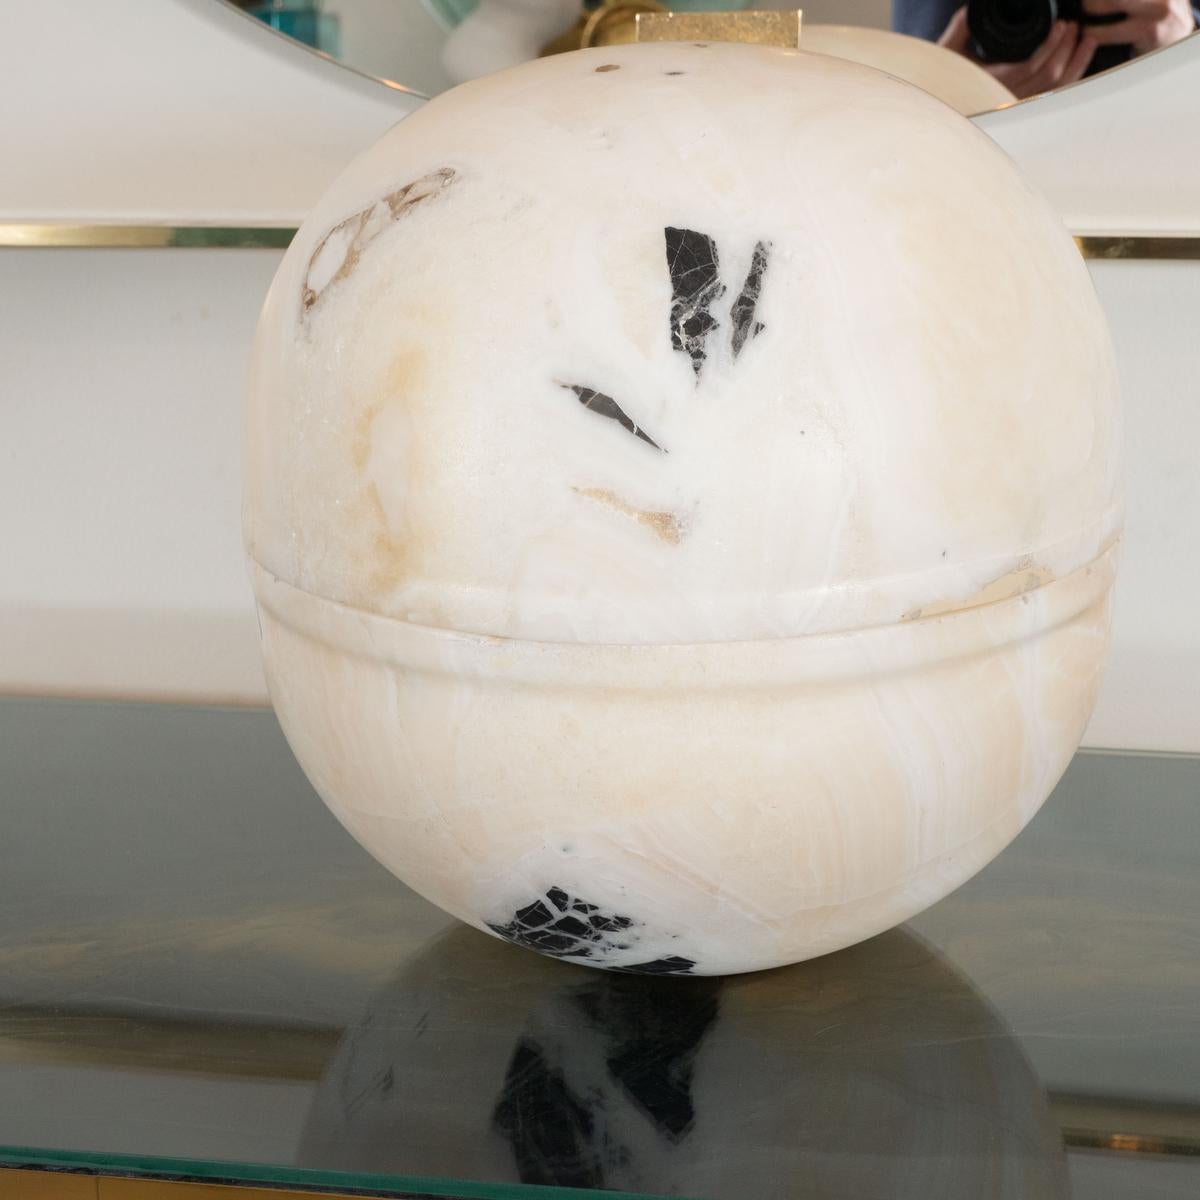 Ovoid marble object with removable top for storage.